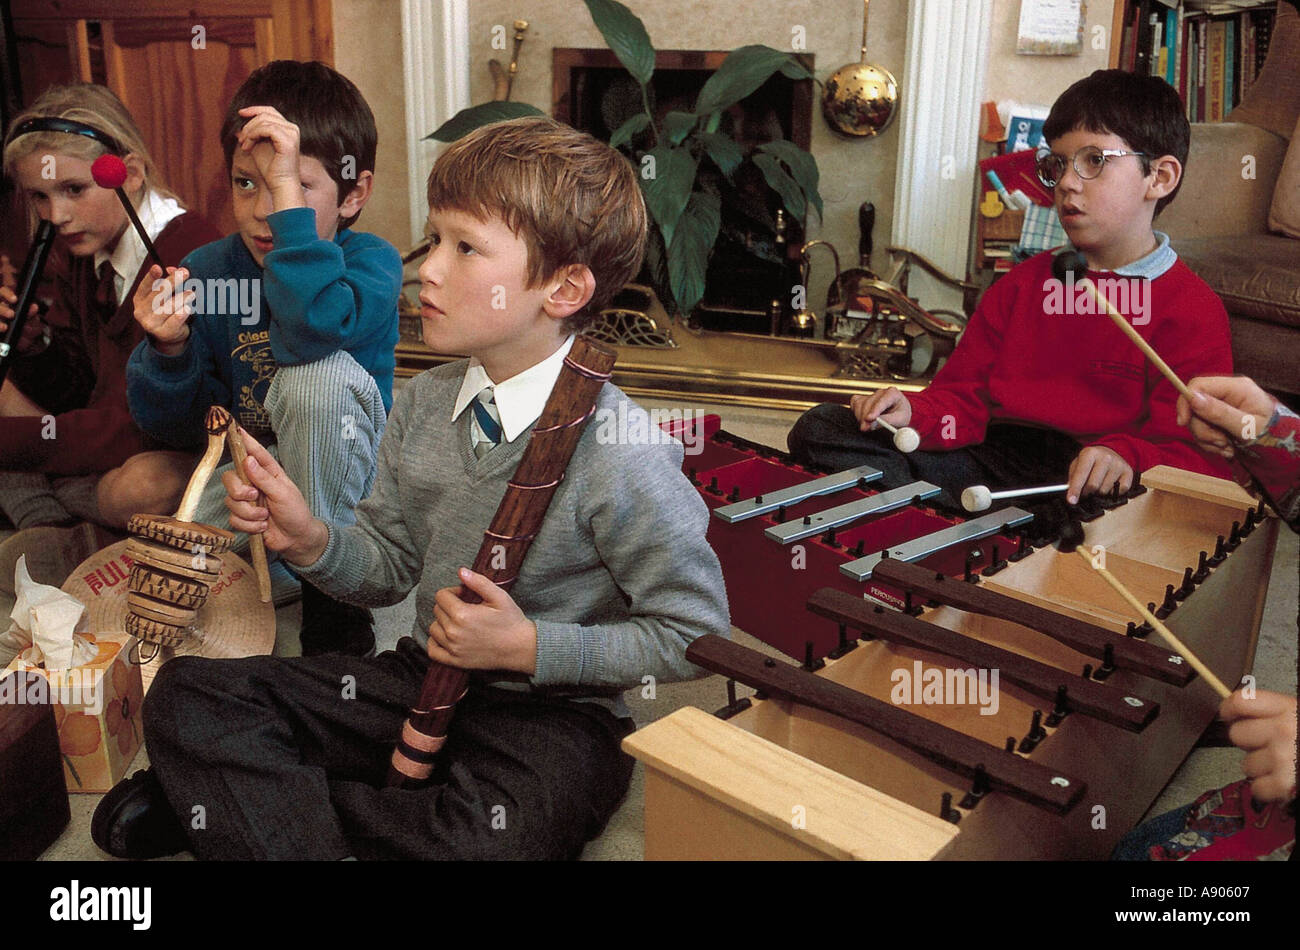 Children Playing Musical Instruments Stock Photo Alamy